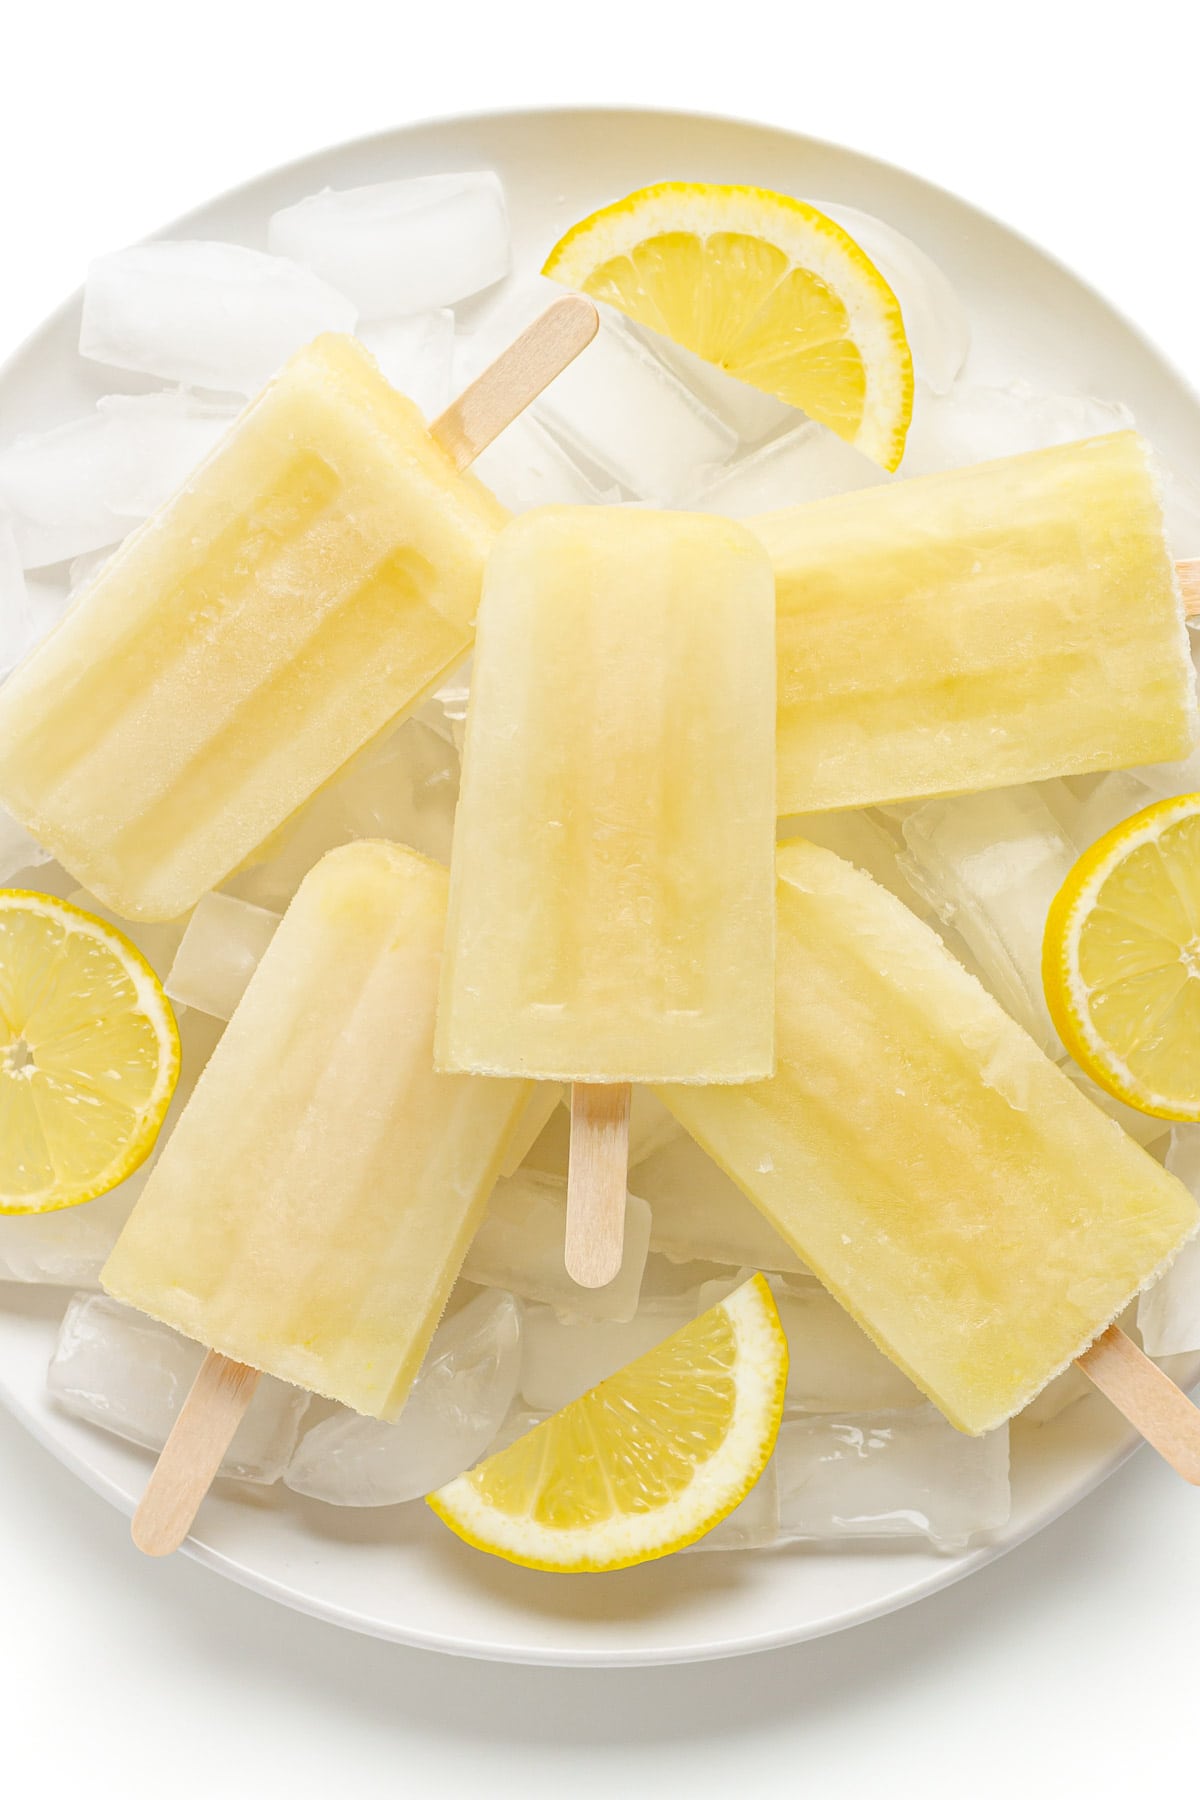 Pile of lemon popsicles on a plate of ice with lemon slices.